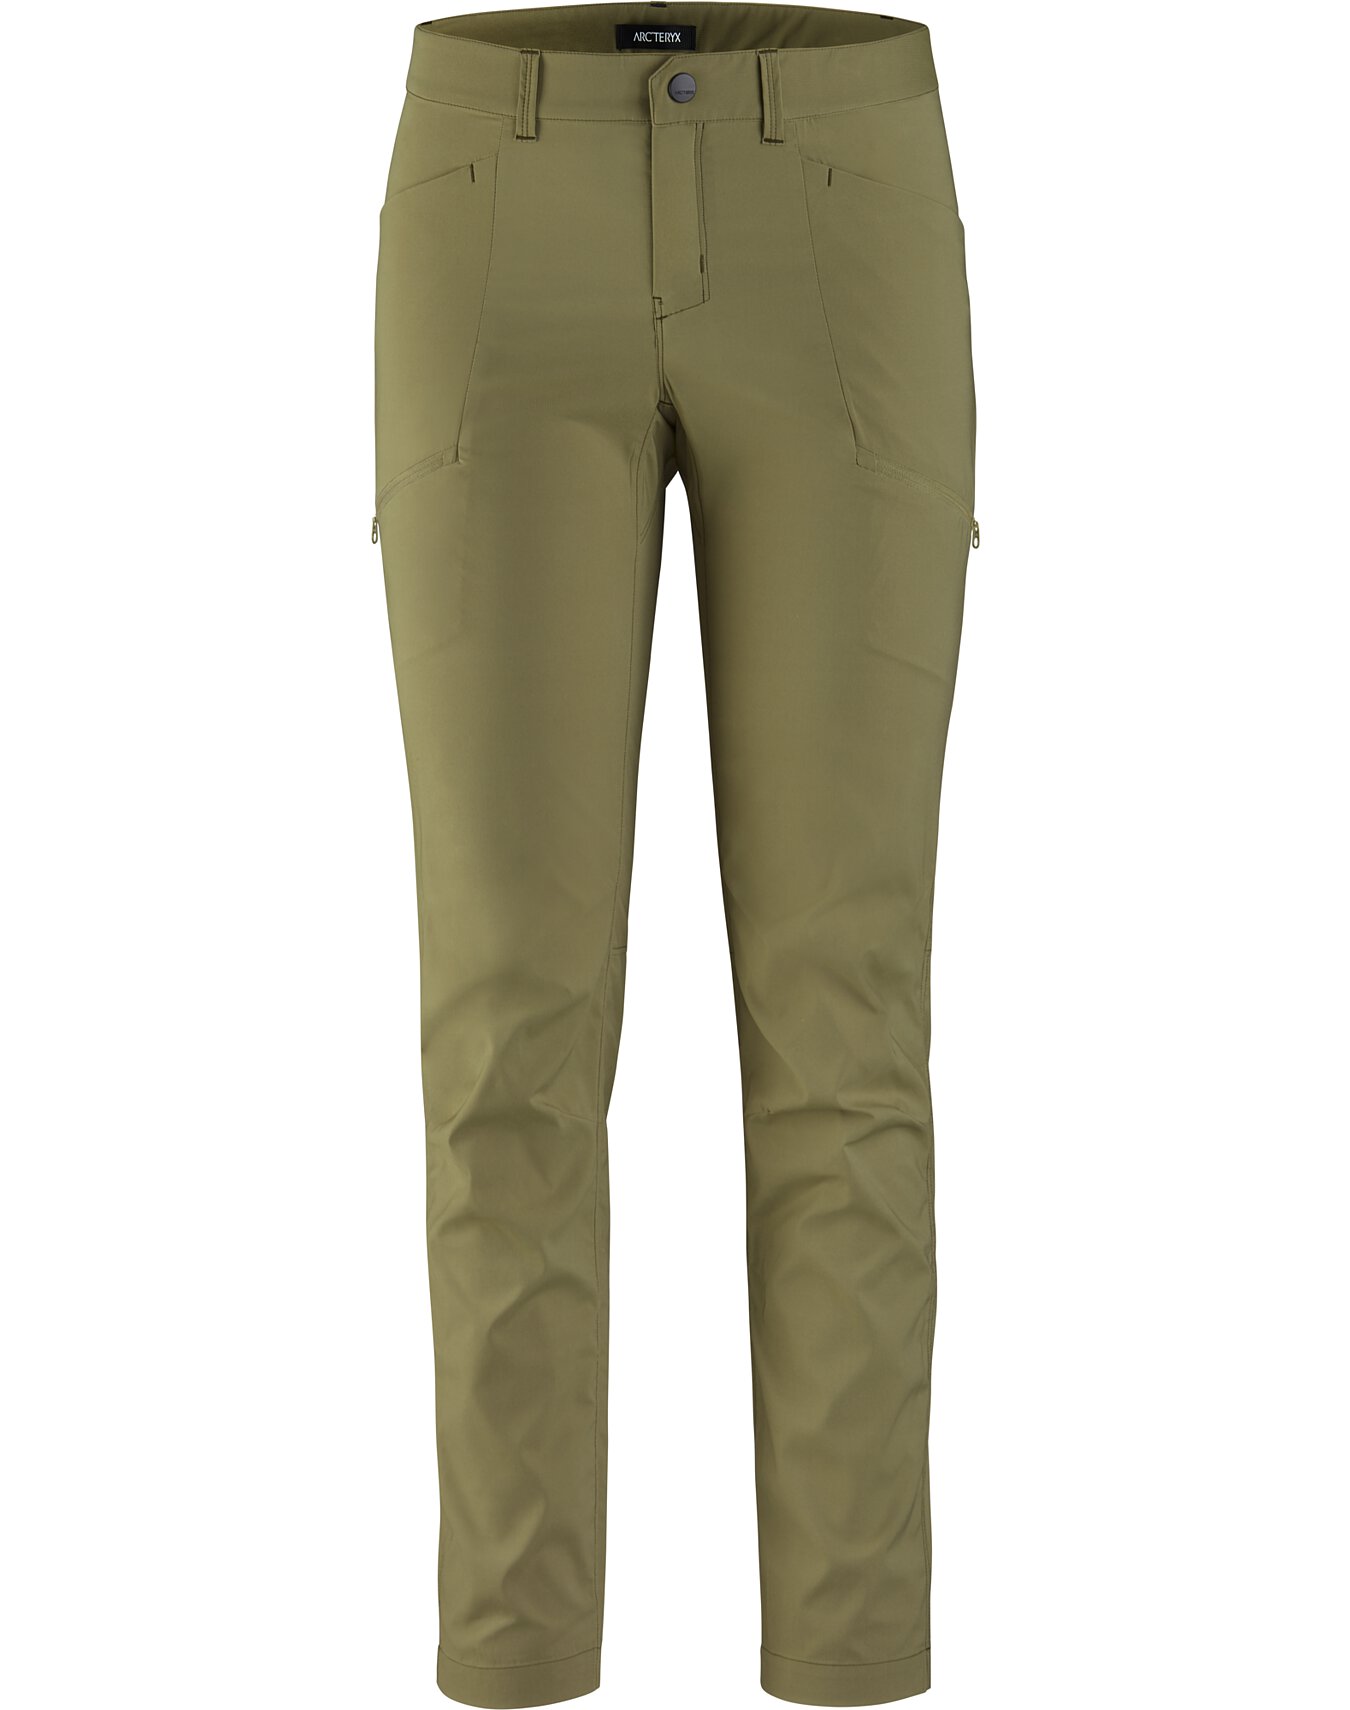 ladies lightweight trousers for hot countries